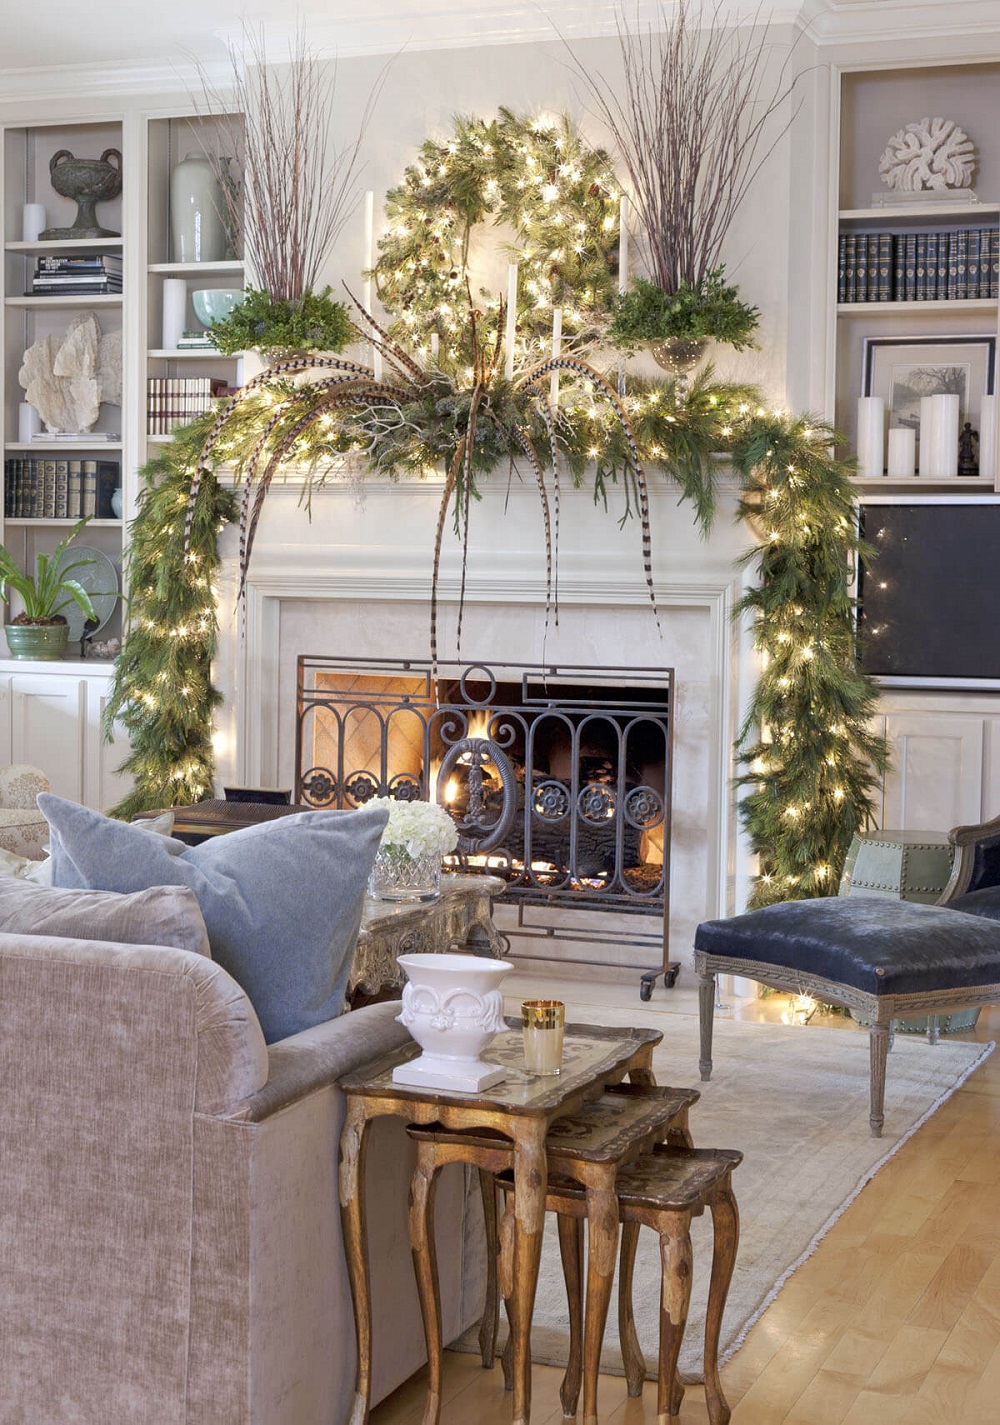 t4-6 Christmas living room decorations you must try in the holiday season